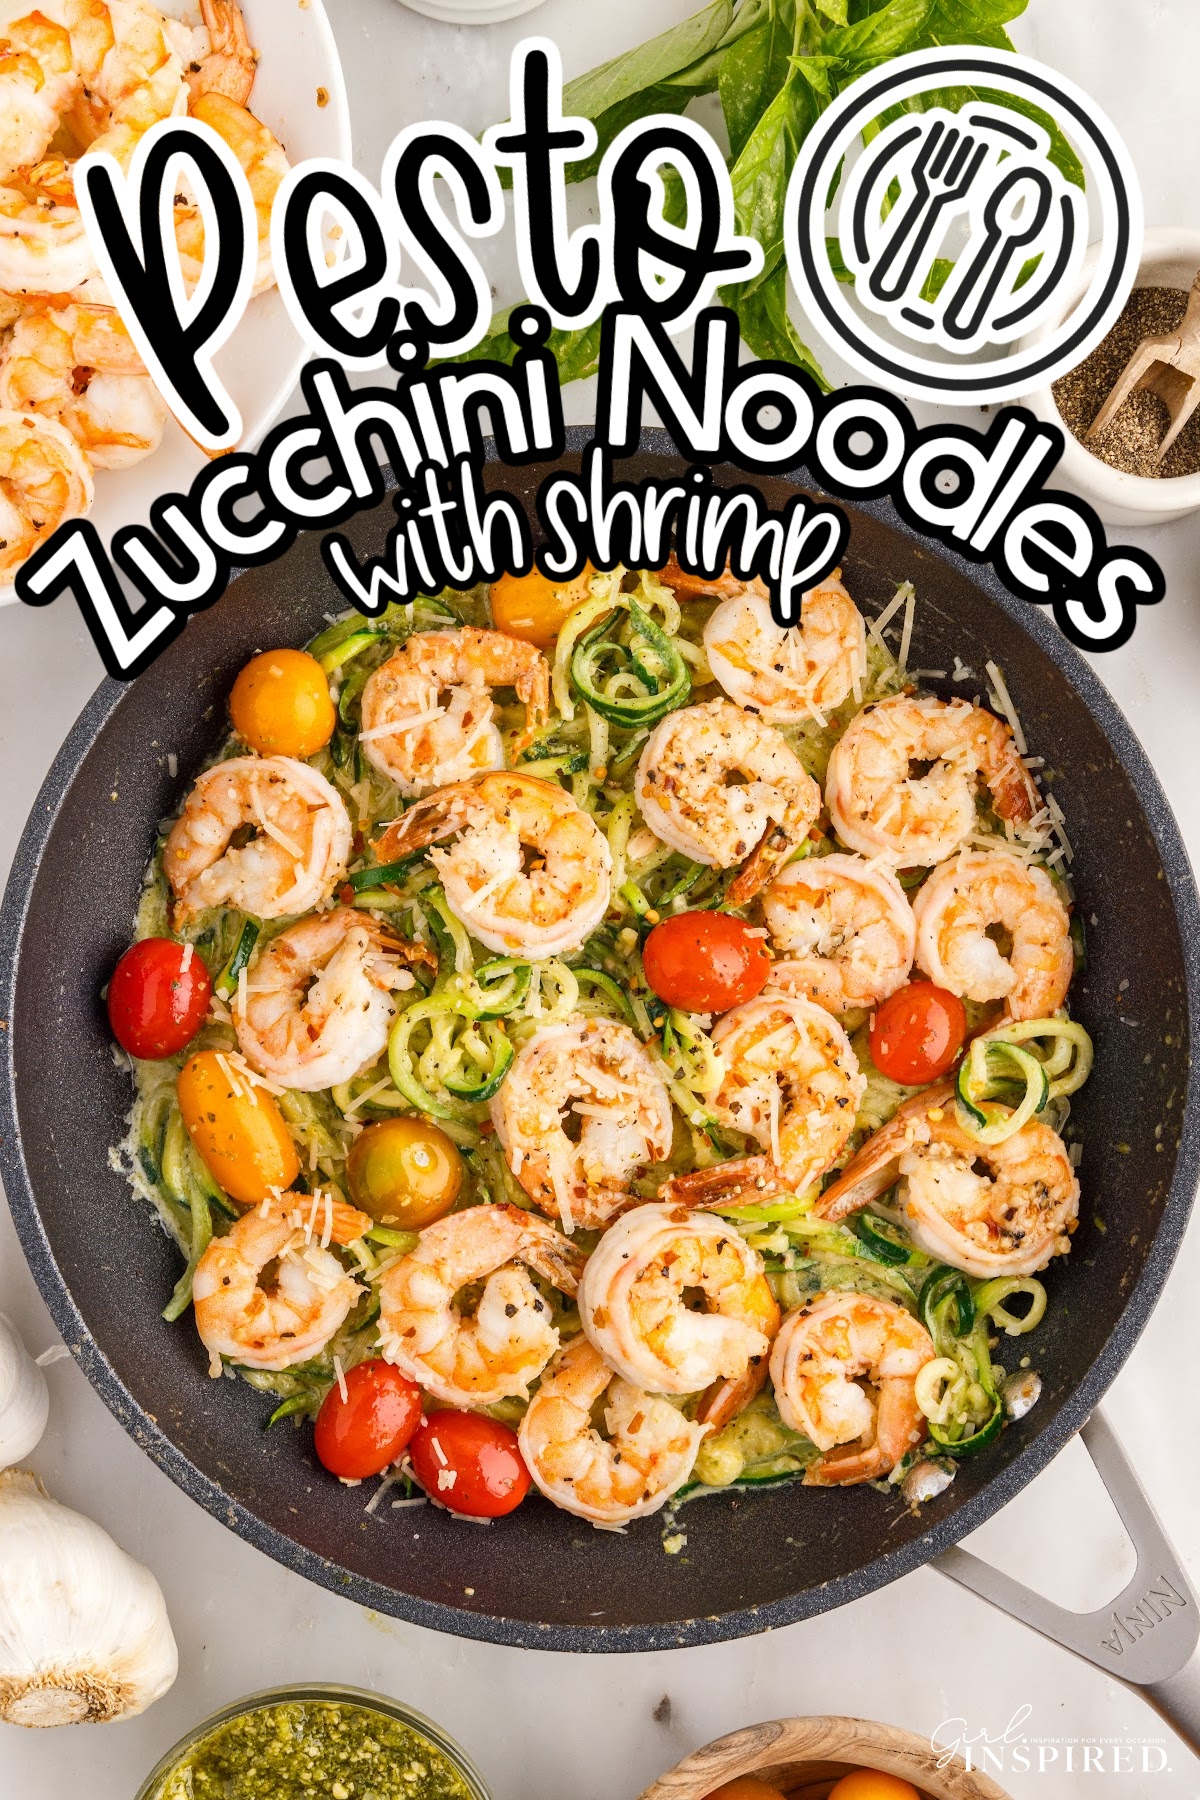 Overhead view of Pesto Zucchini Noodles with Shrimpin a skillet with text overlay.